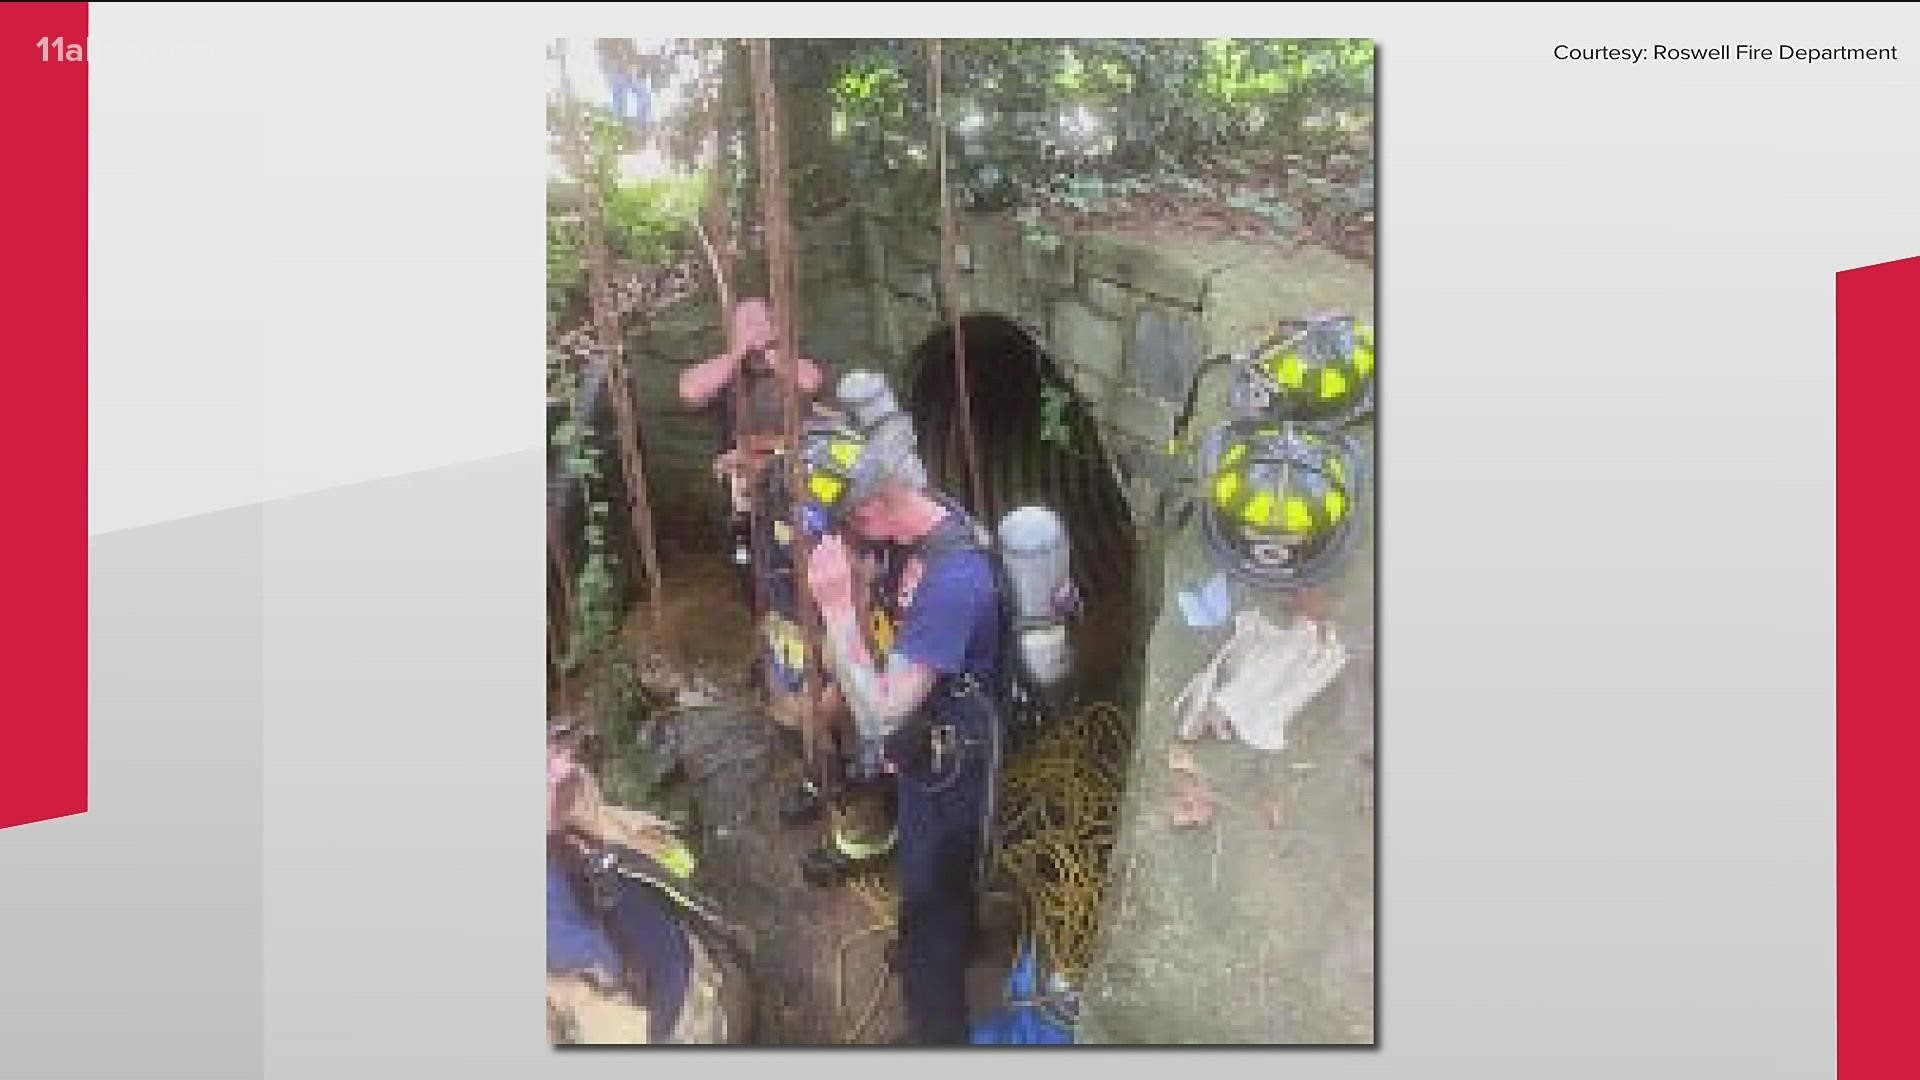 An elderly woman is expected to be okay after first responders rescued her from a storm drain near Seven Branch Park, Roswell fire officials said.